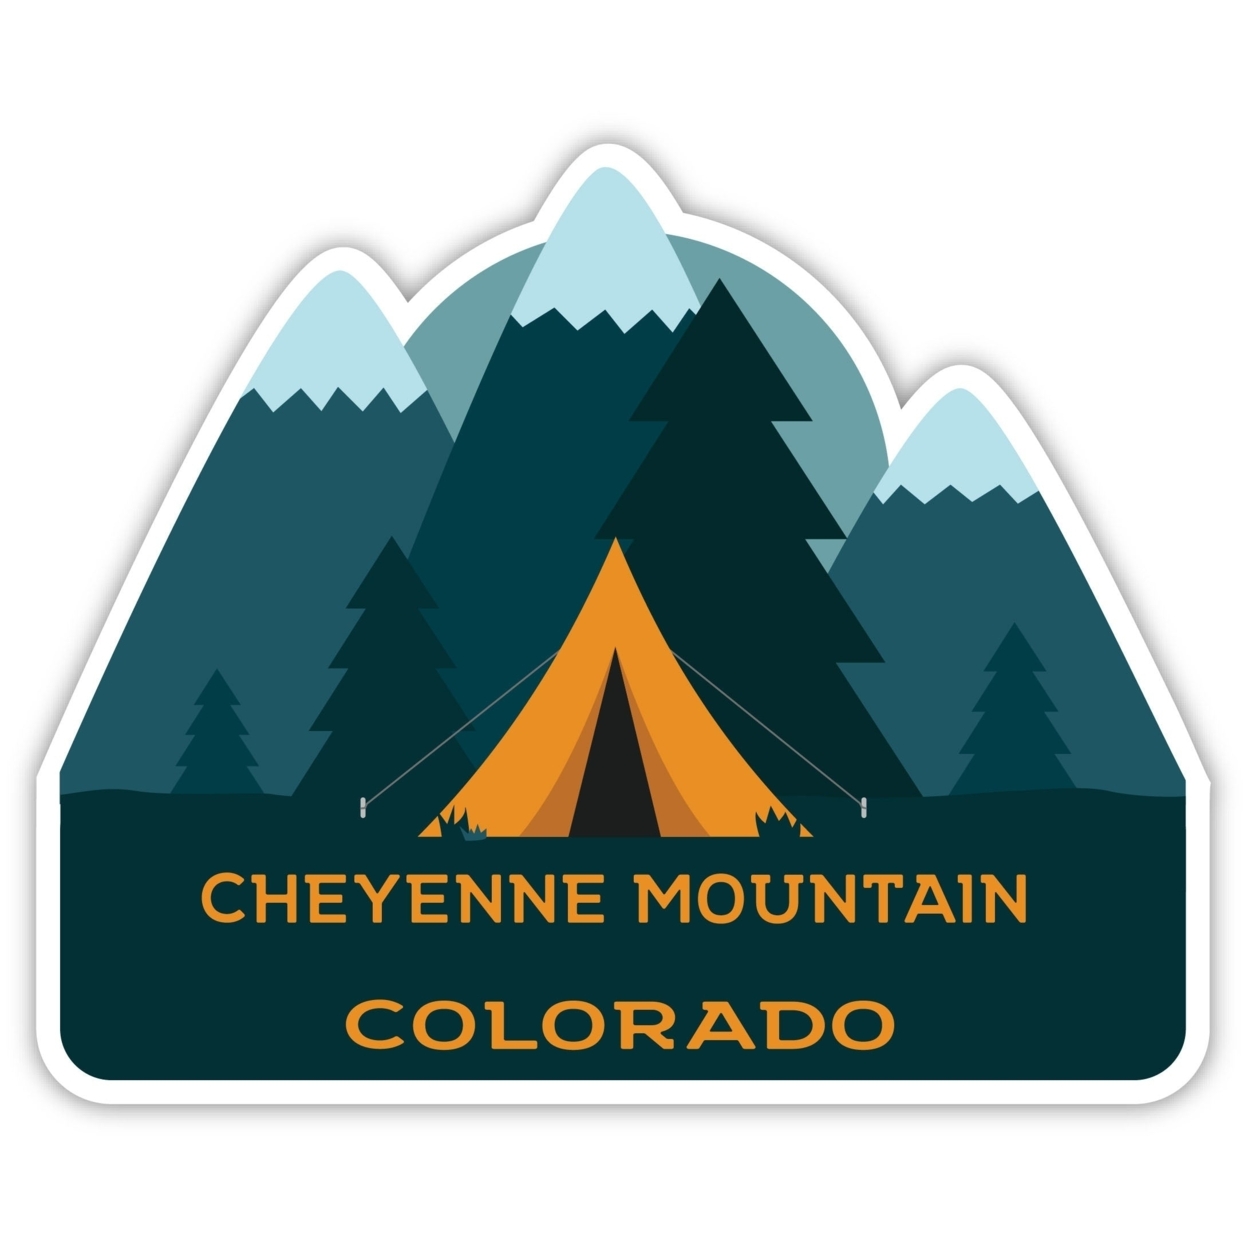 Cheyenne Mountain Colorado Souvenir Decorative Stickers (Choose Theme And Size) - 4-Pack, 4-Inch, Tent